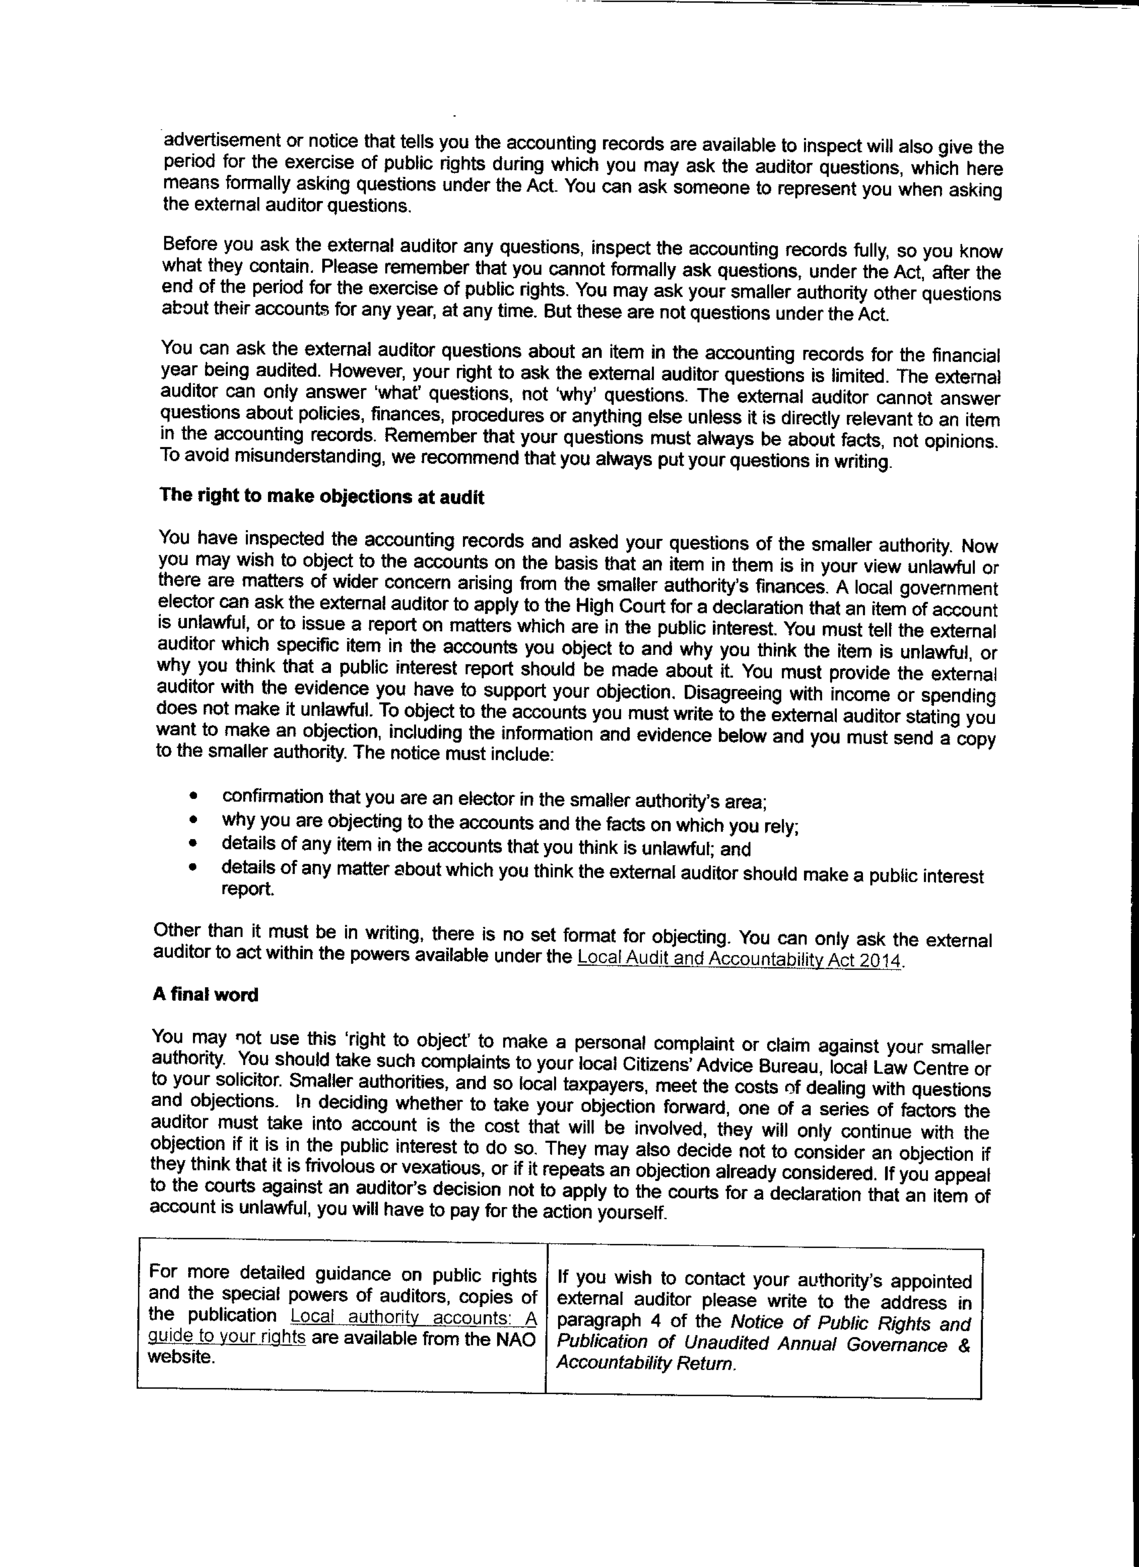 Audit YE 31/3/22: Notice of Public Rights Page 3